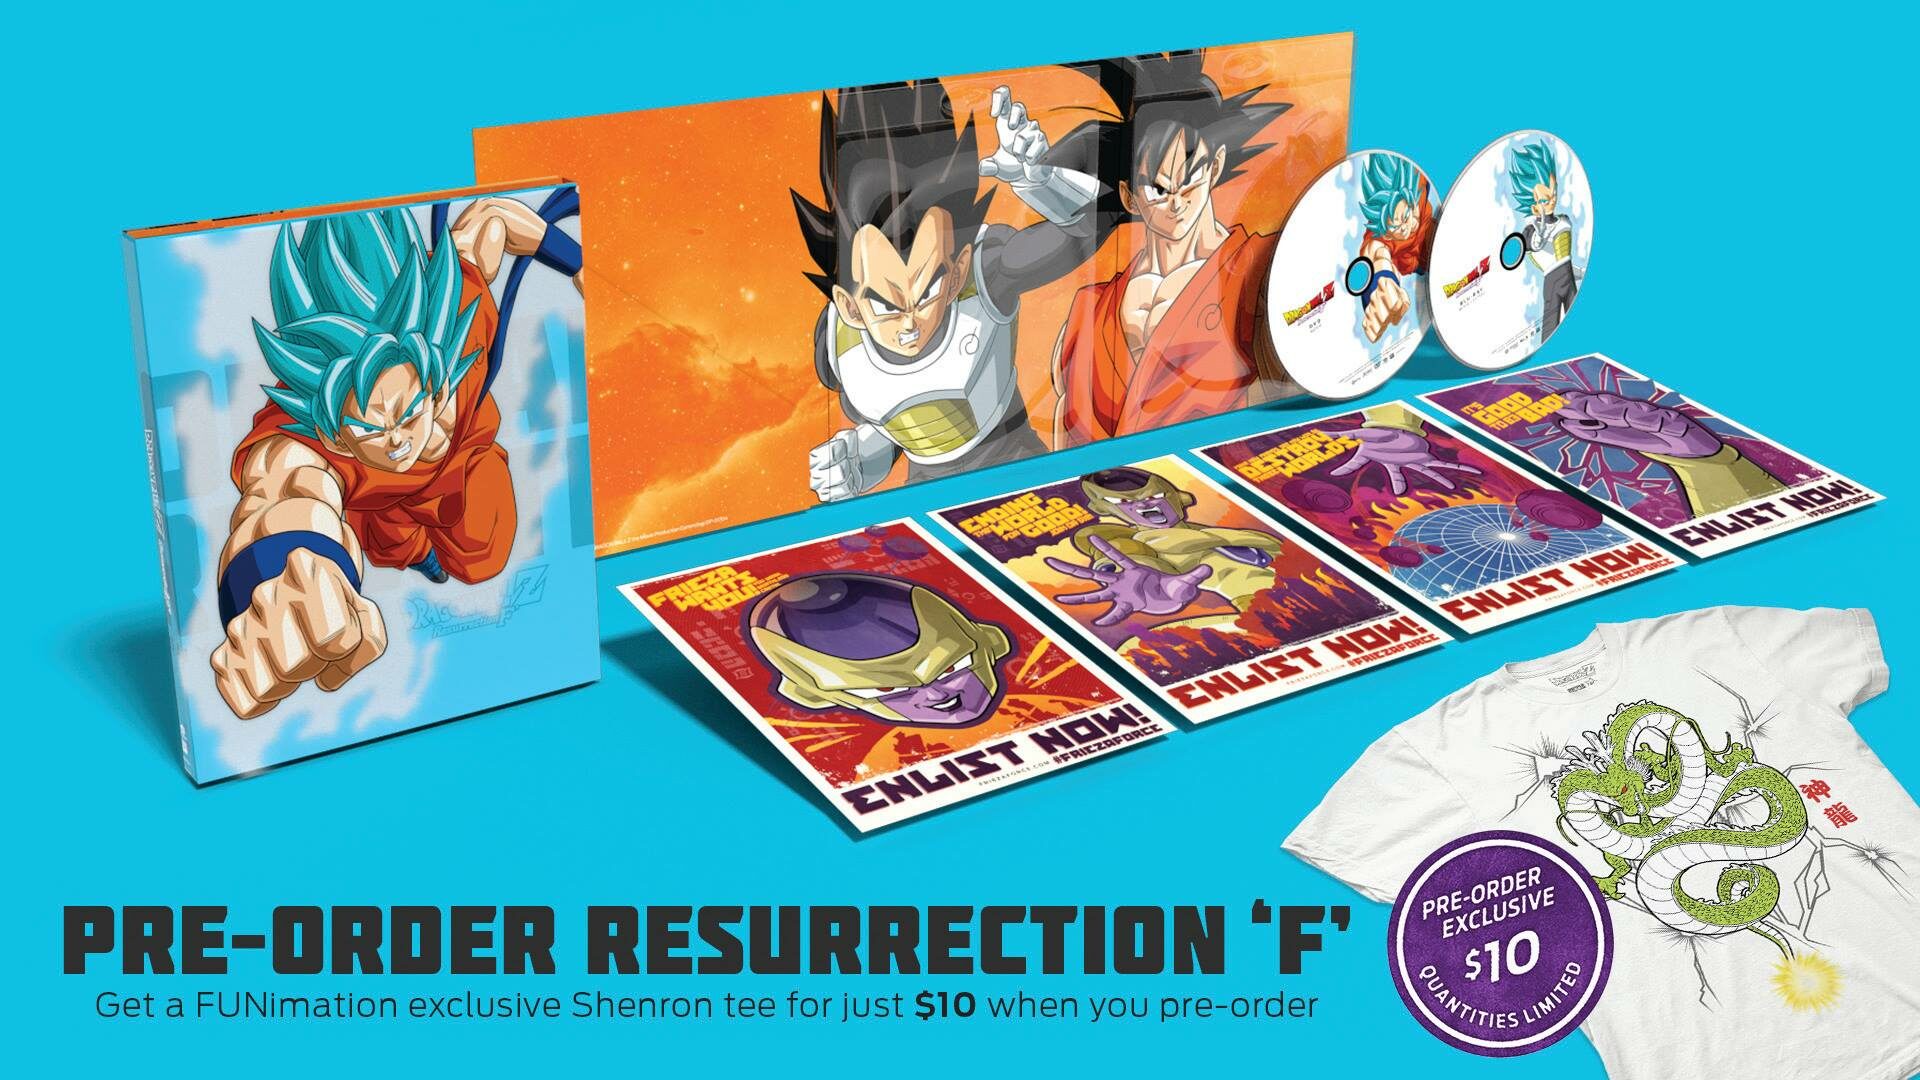 FUNimation Entertainment Announces Dragon Ball Z: Resurrection ‘F’ comes to Home Video Oct. 20th